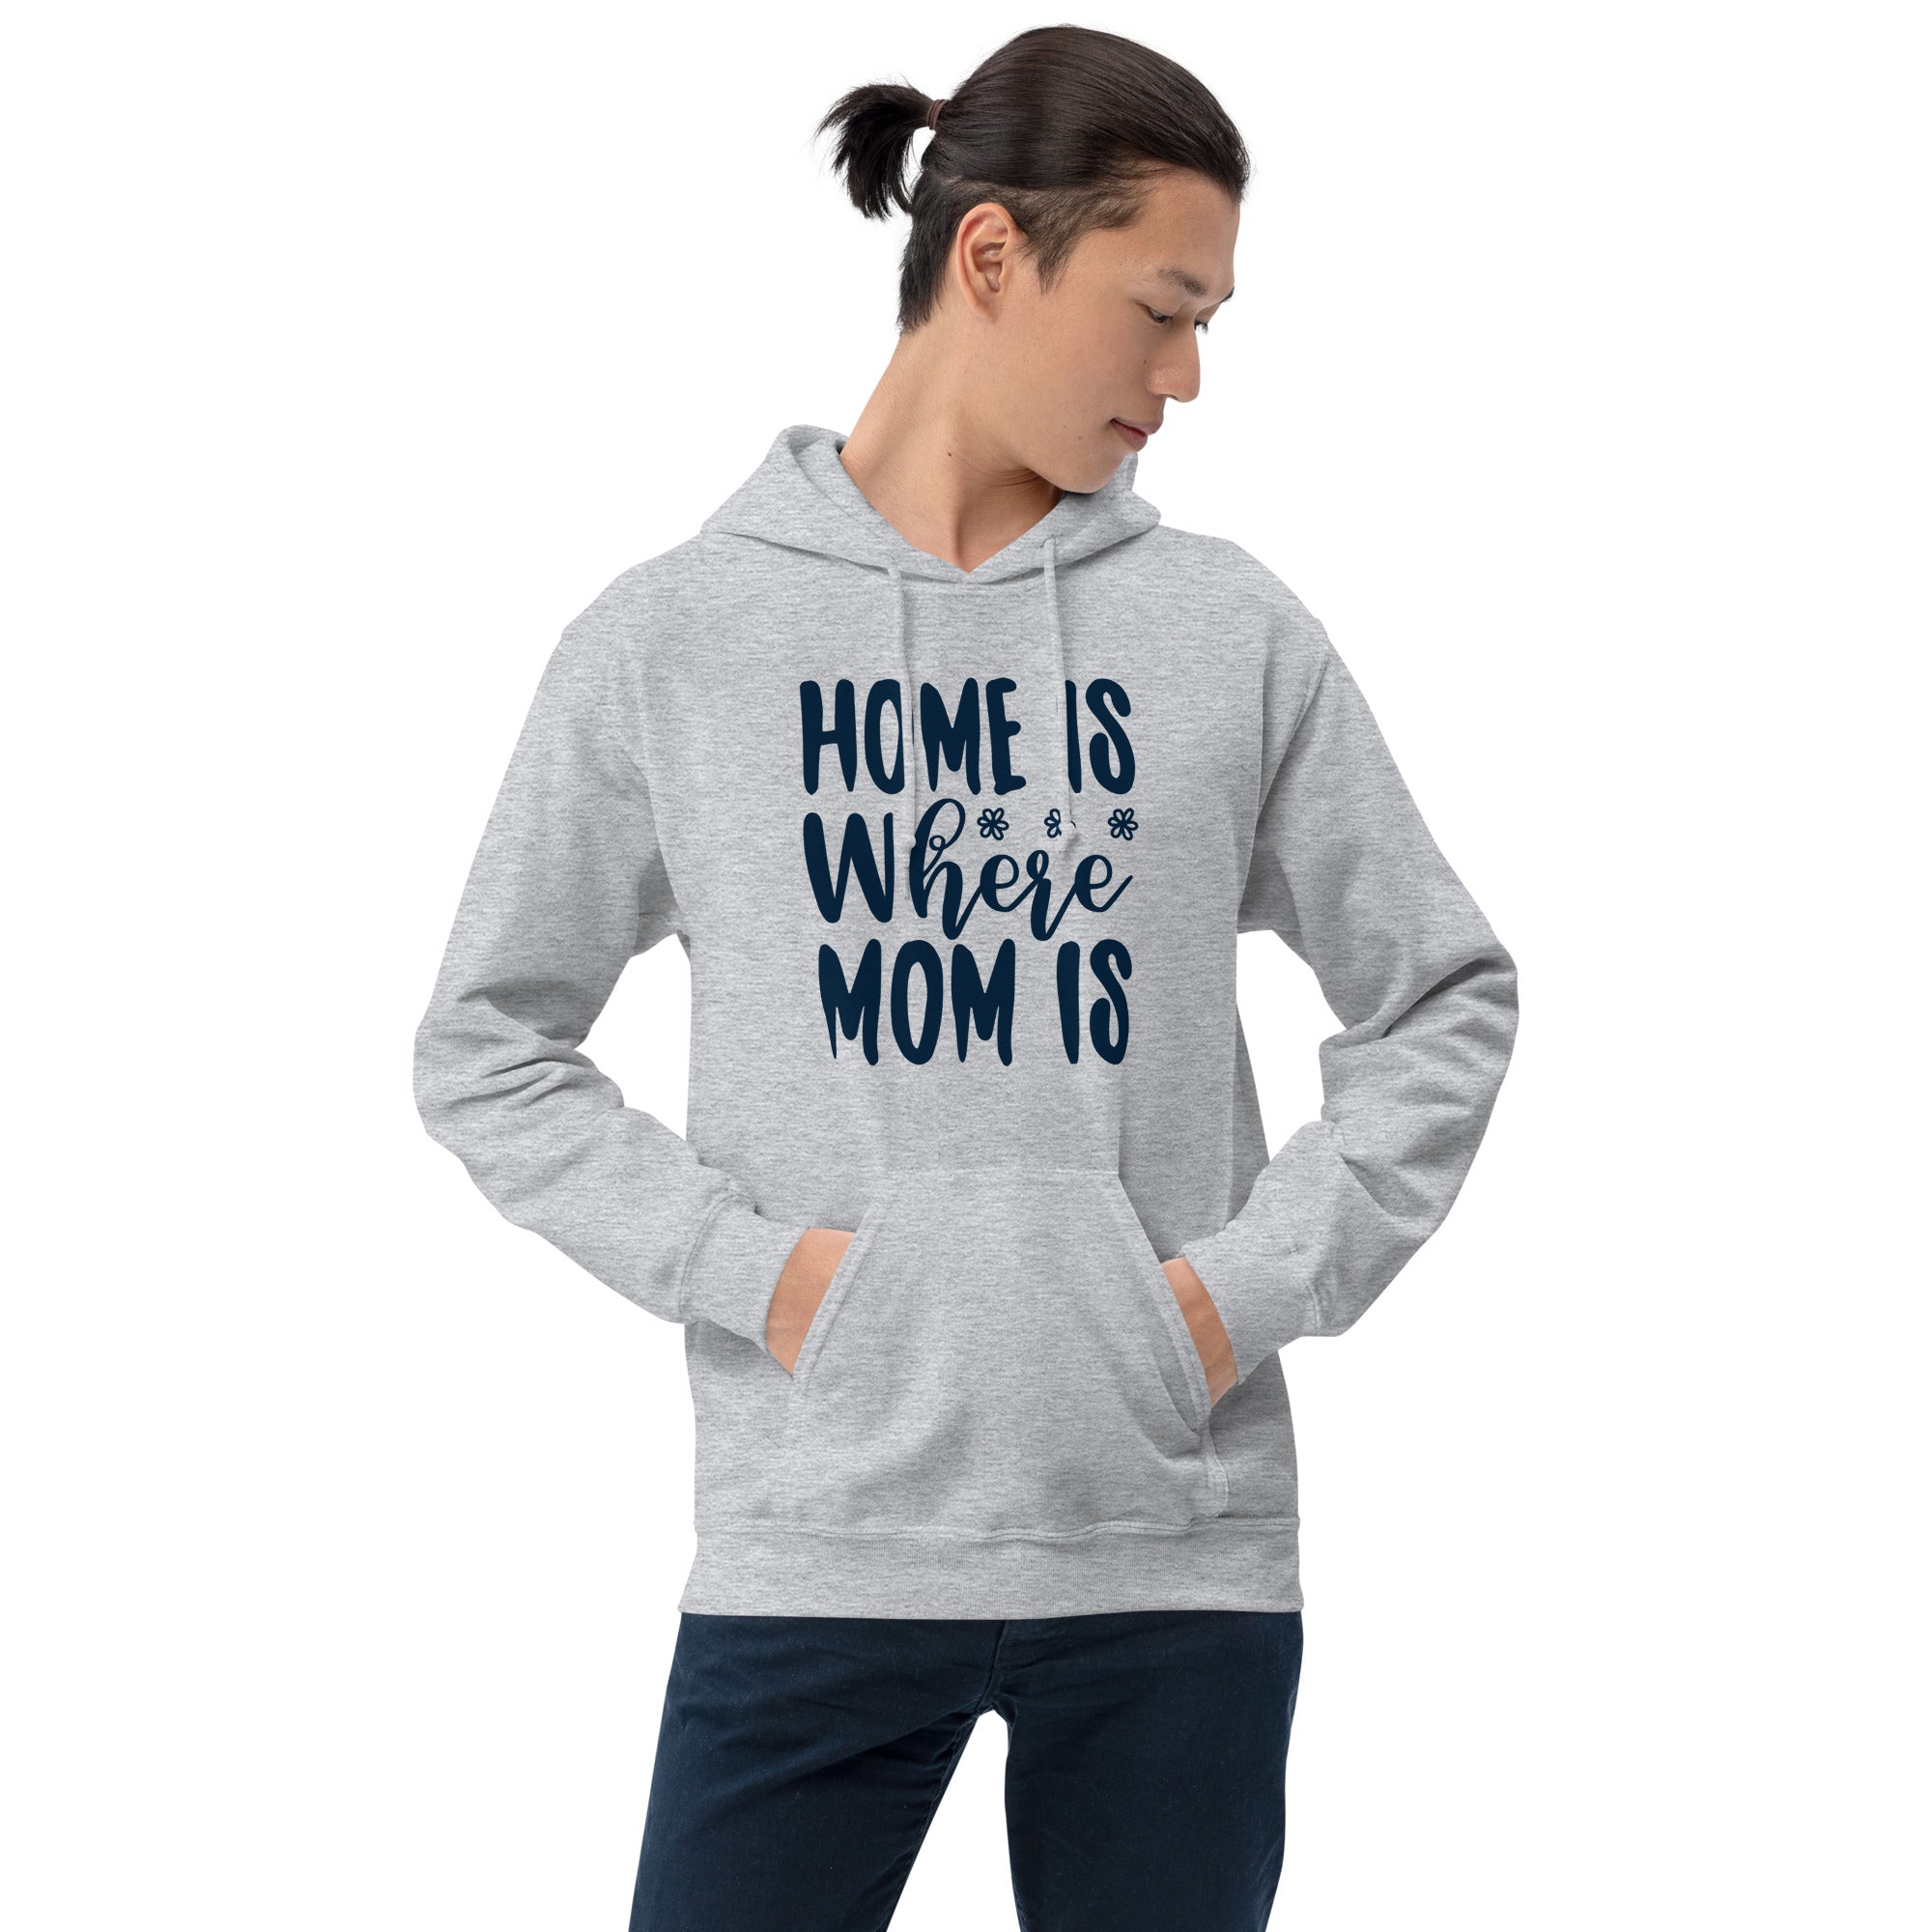 Home Is Where Mom Is - Unisex Hoodie